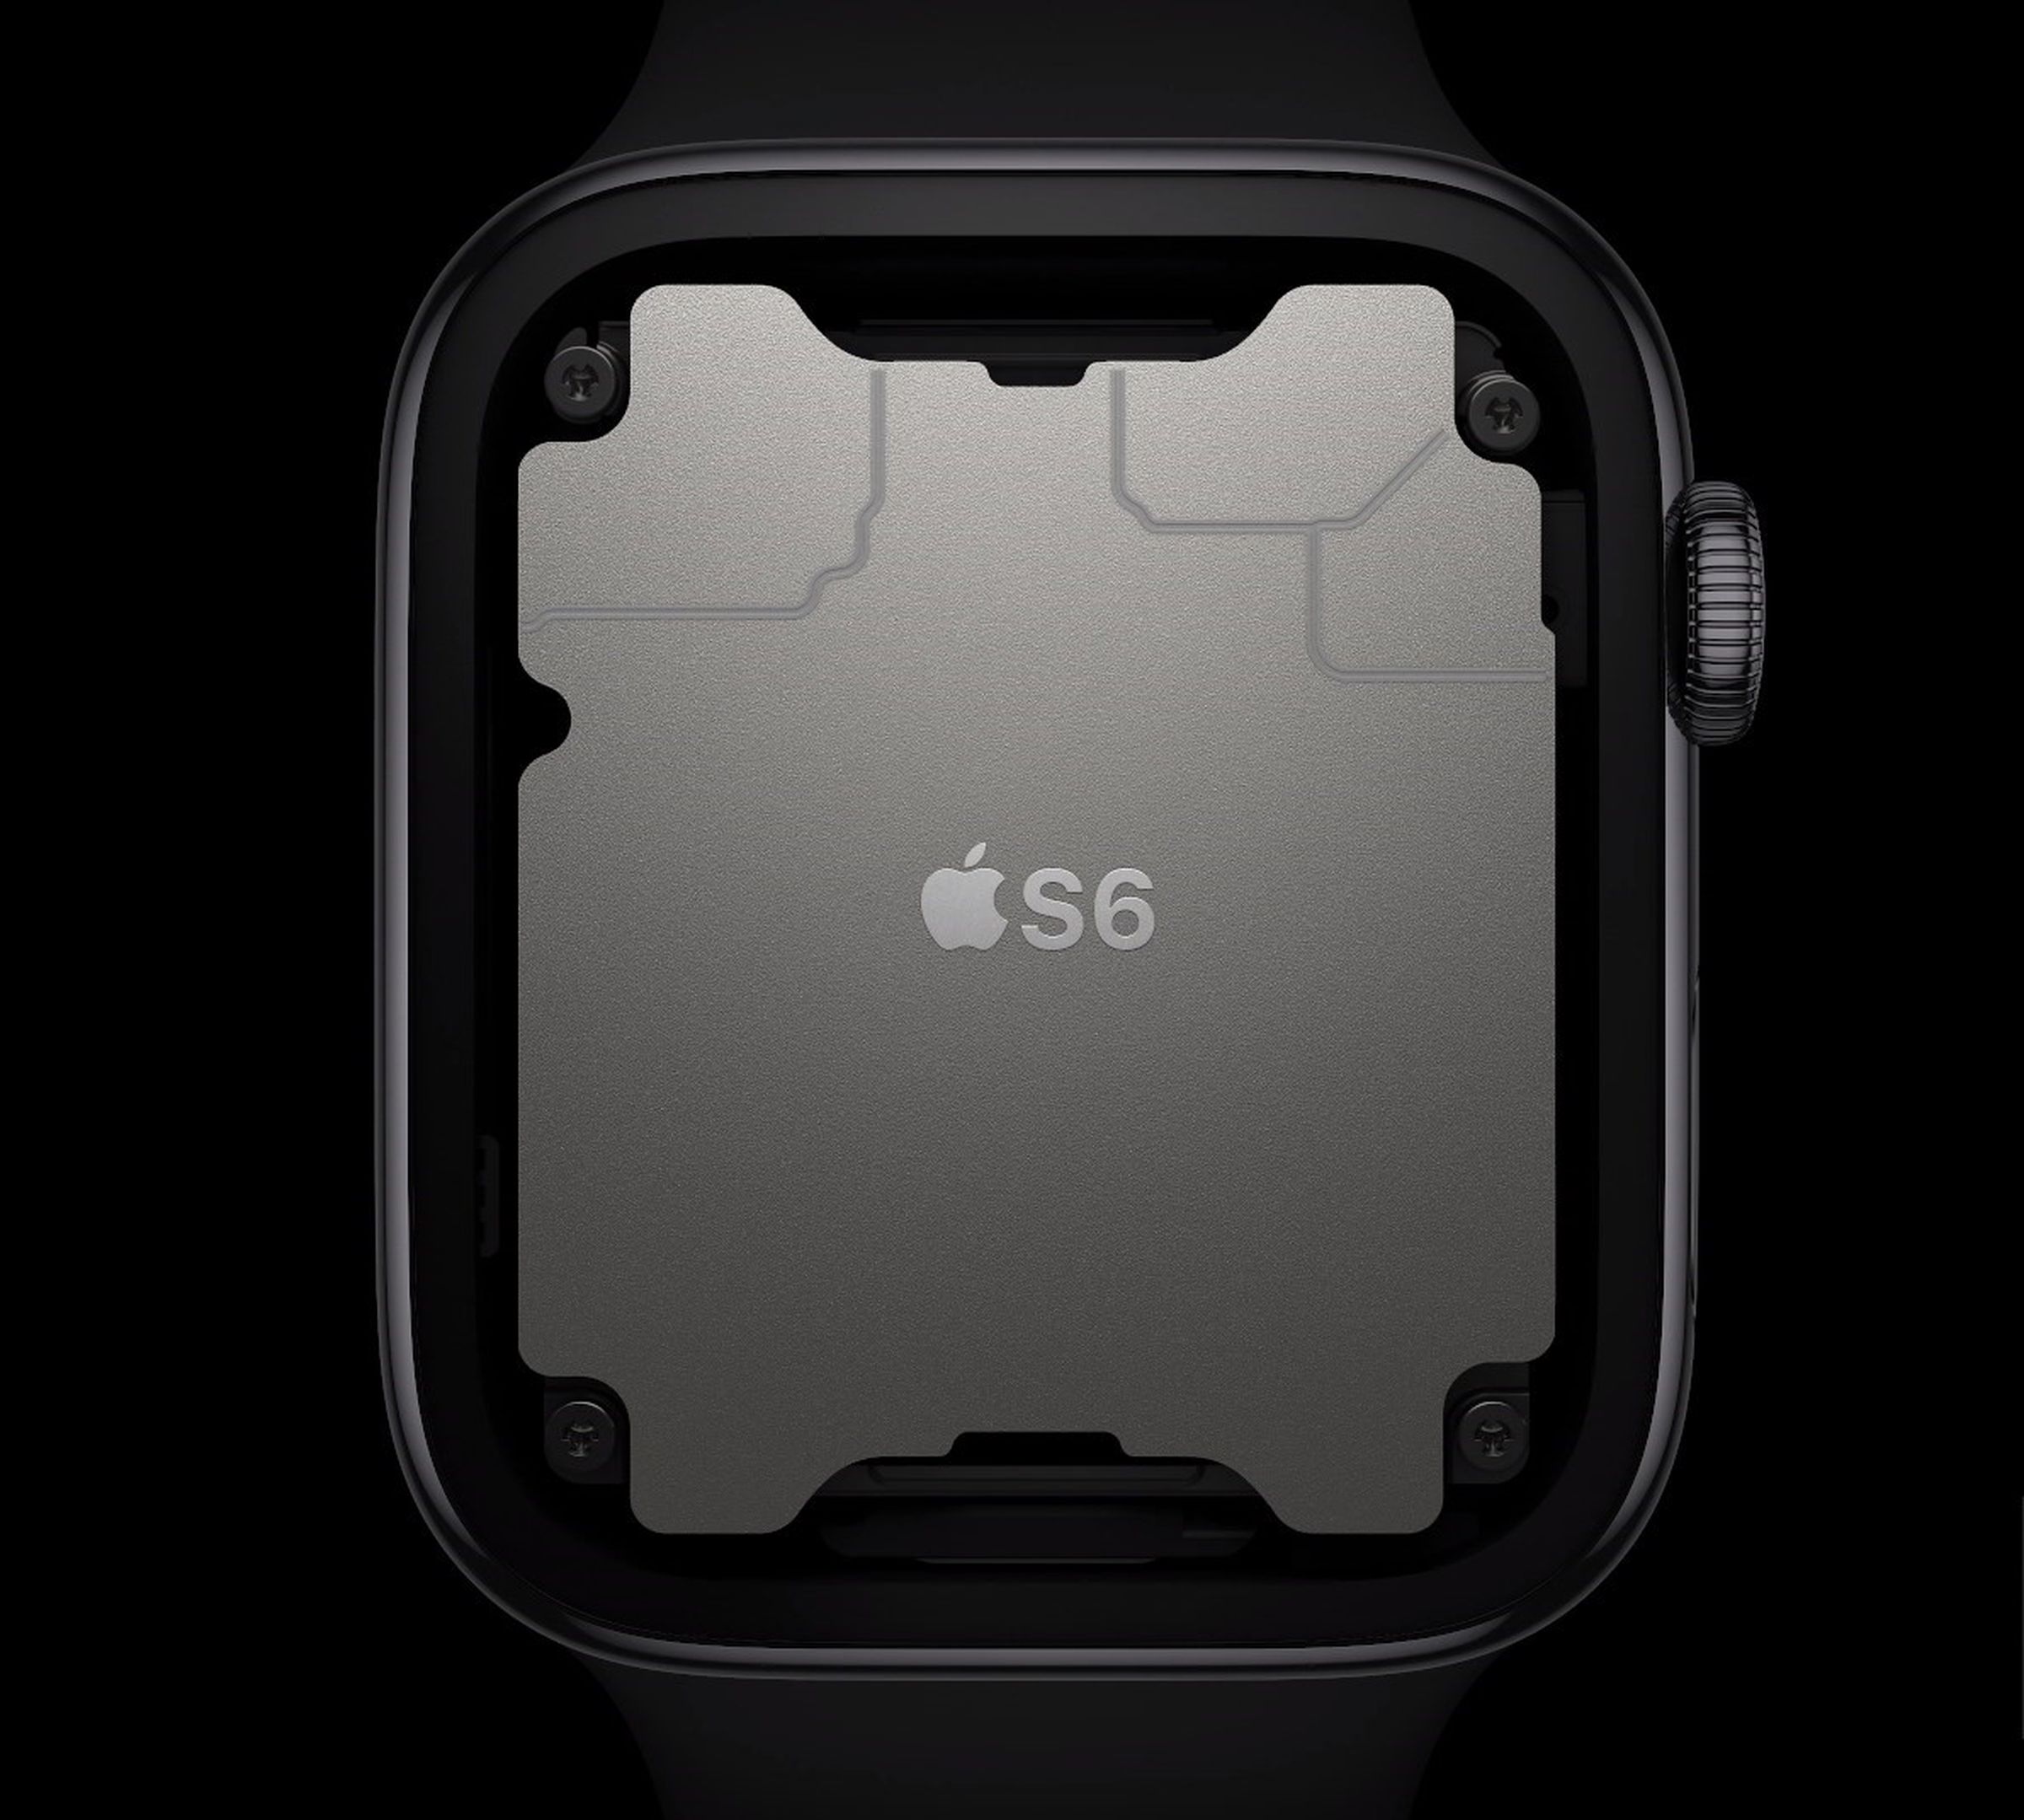 The Apple Watch Series 6 is powered by the new S6 processor.